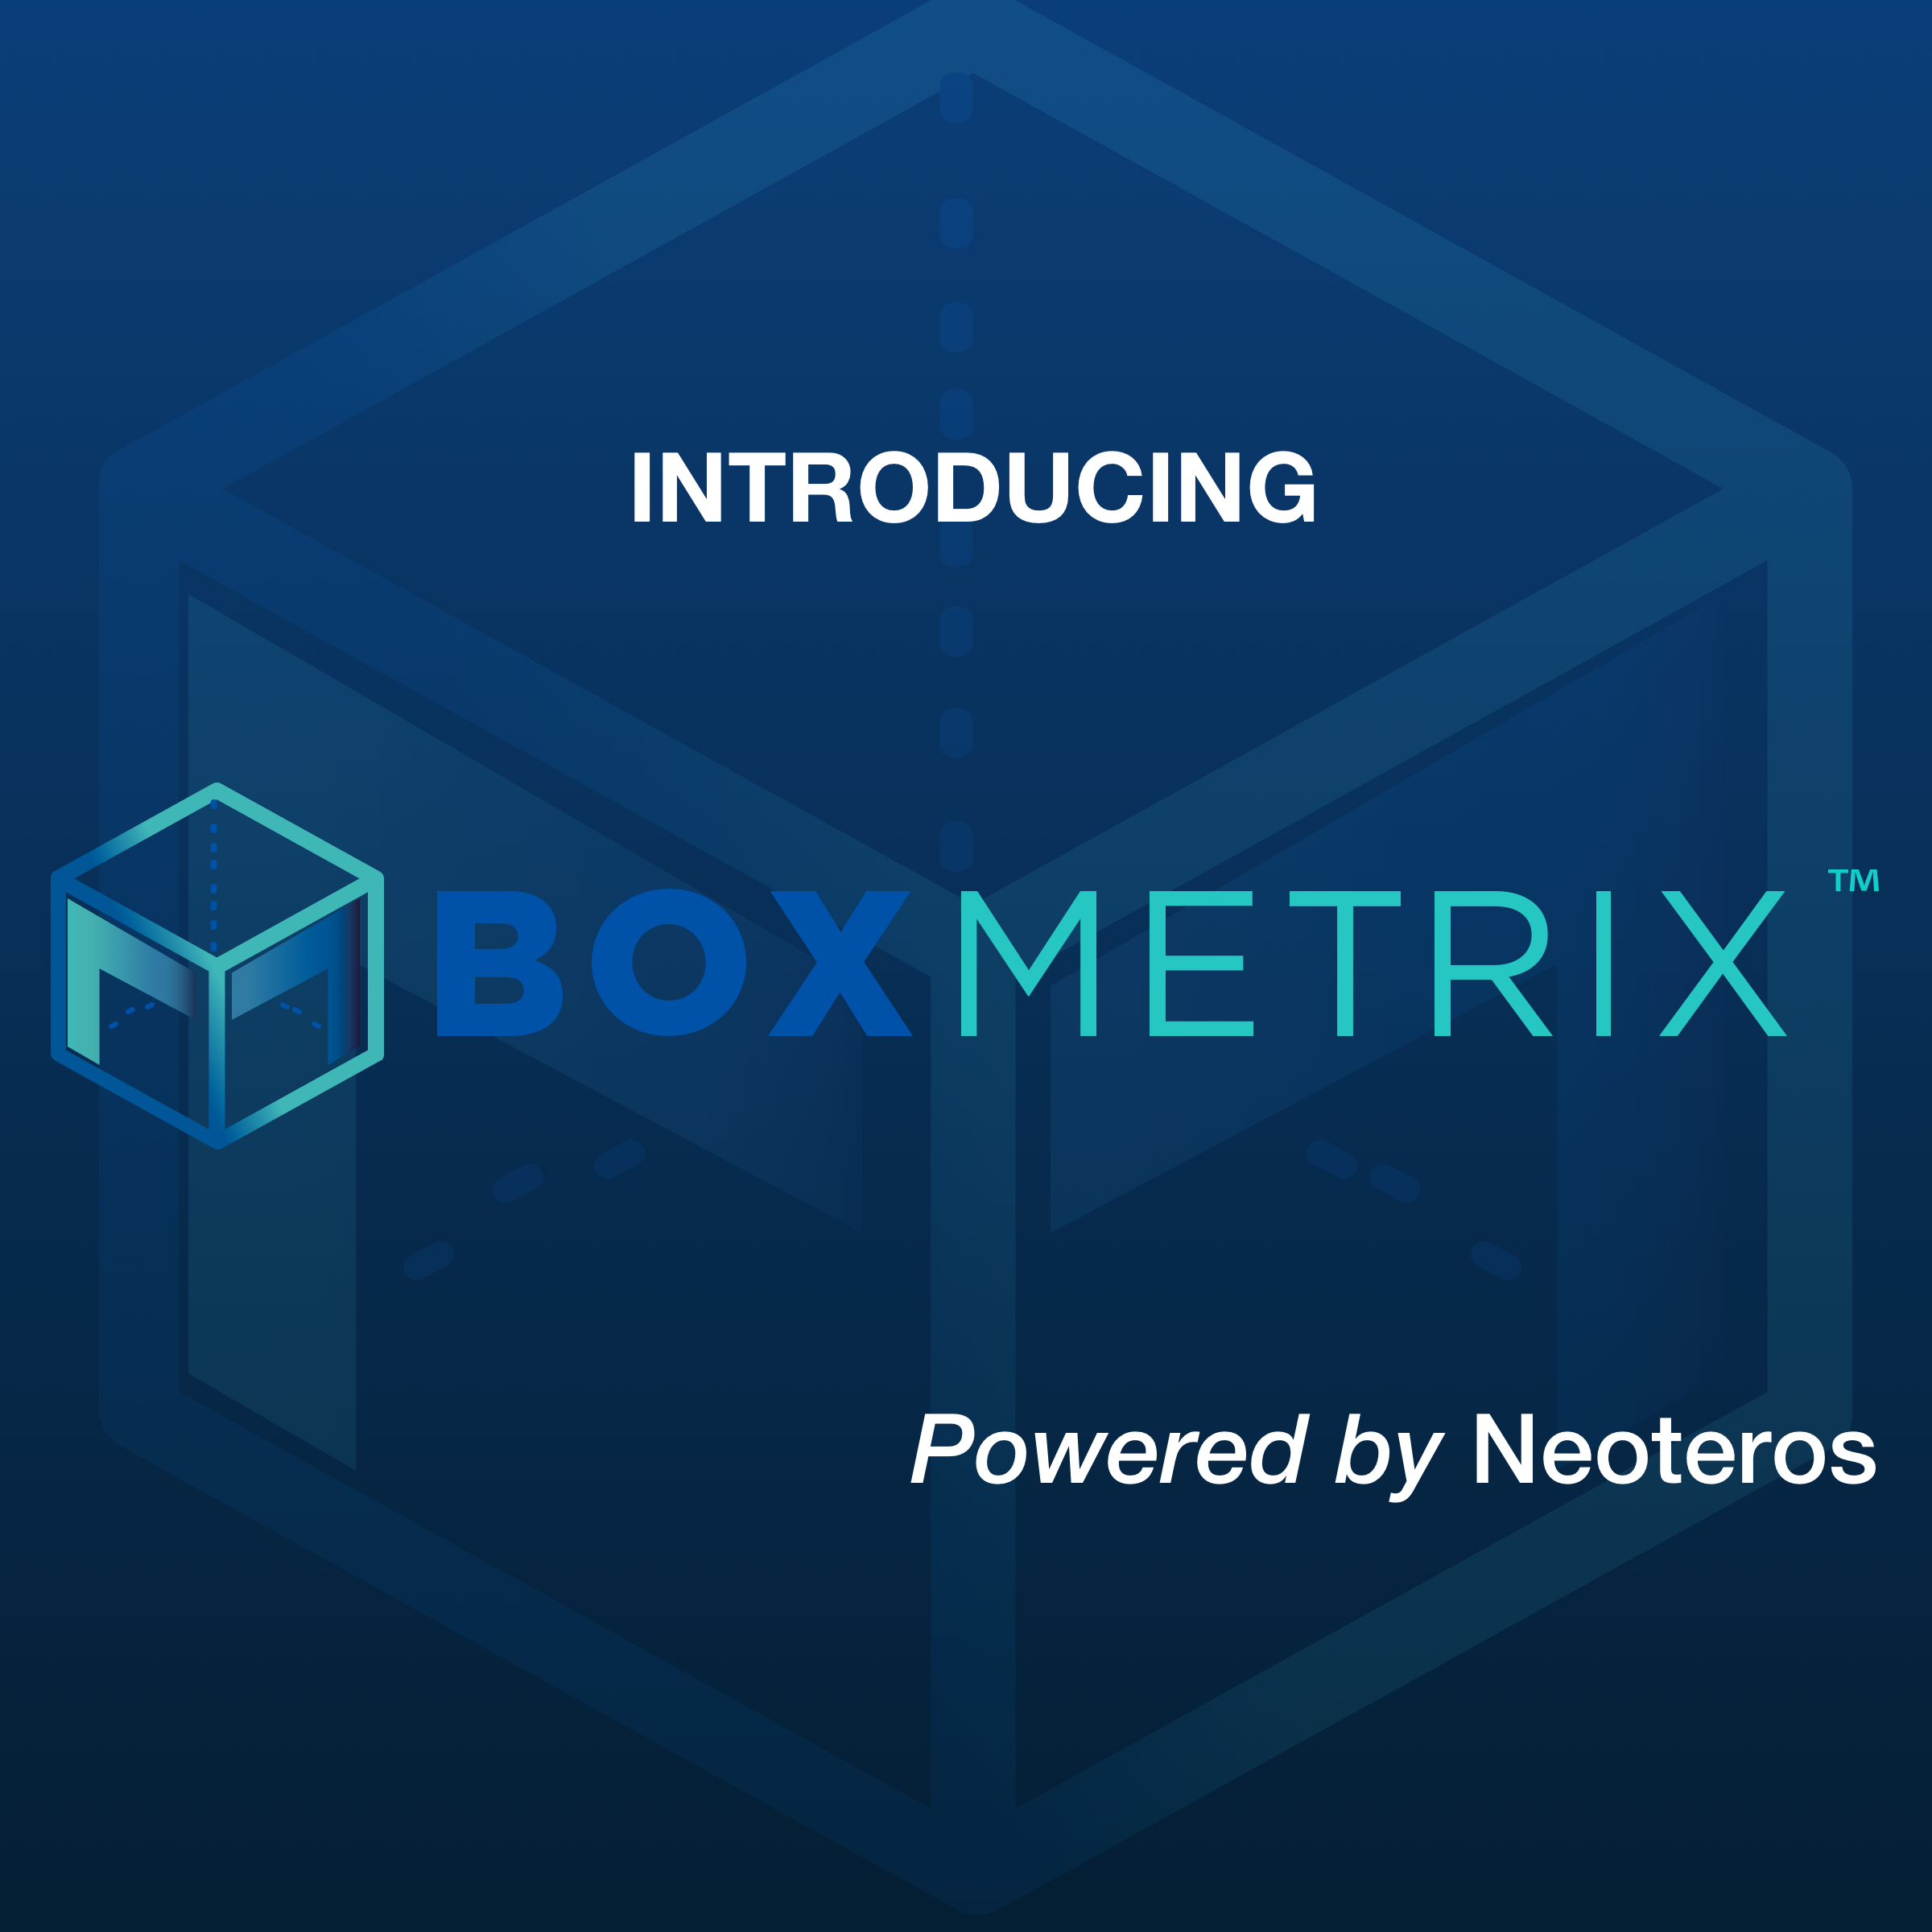 Neoteros and AppIt Ventures Launch BoxMetrix, a Tracking and Monitoring Platform That Will Help Companies Save Billions of Dollars in Lost Revenue